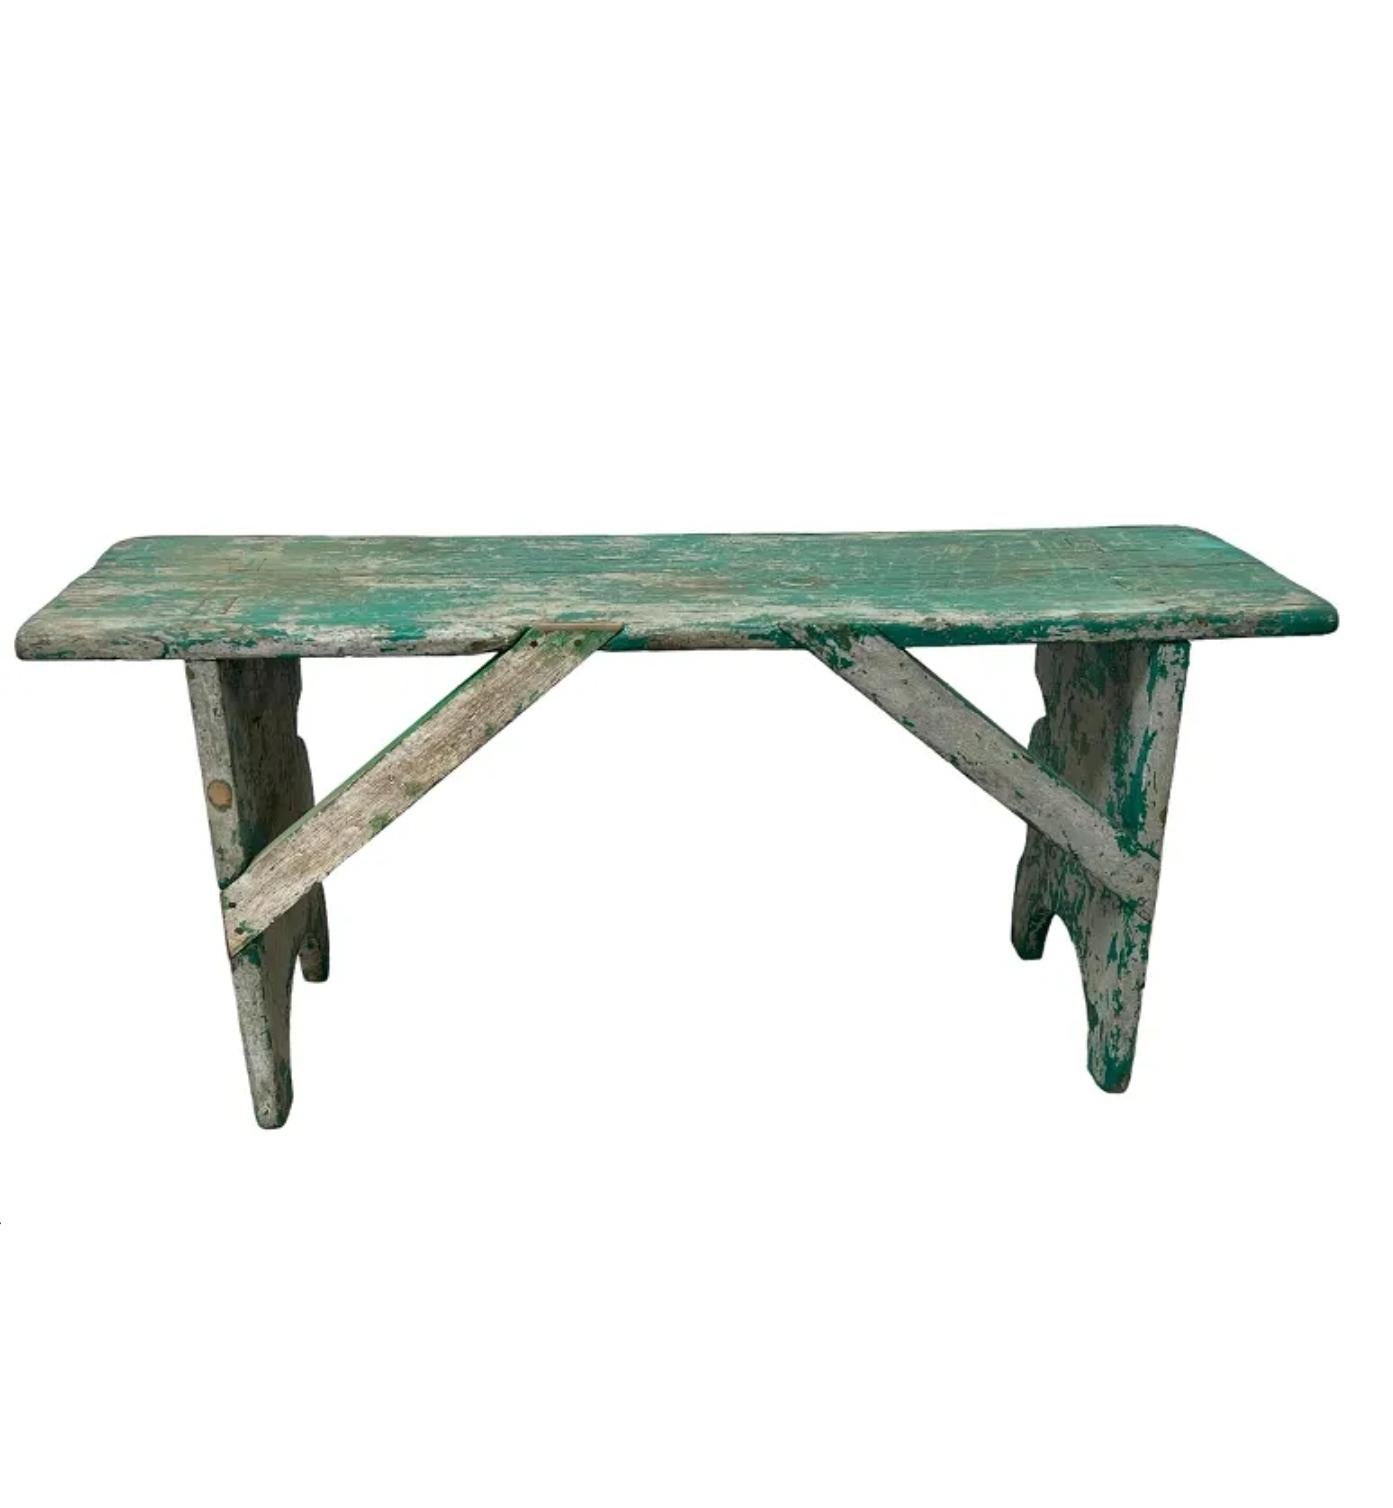 19th Century American Country Pennsylvania Painted Mortised Bench For Sale 5